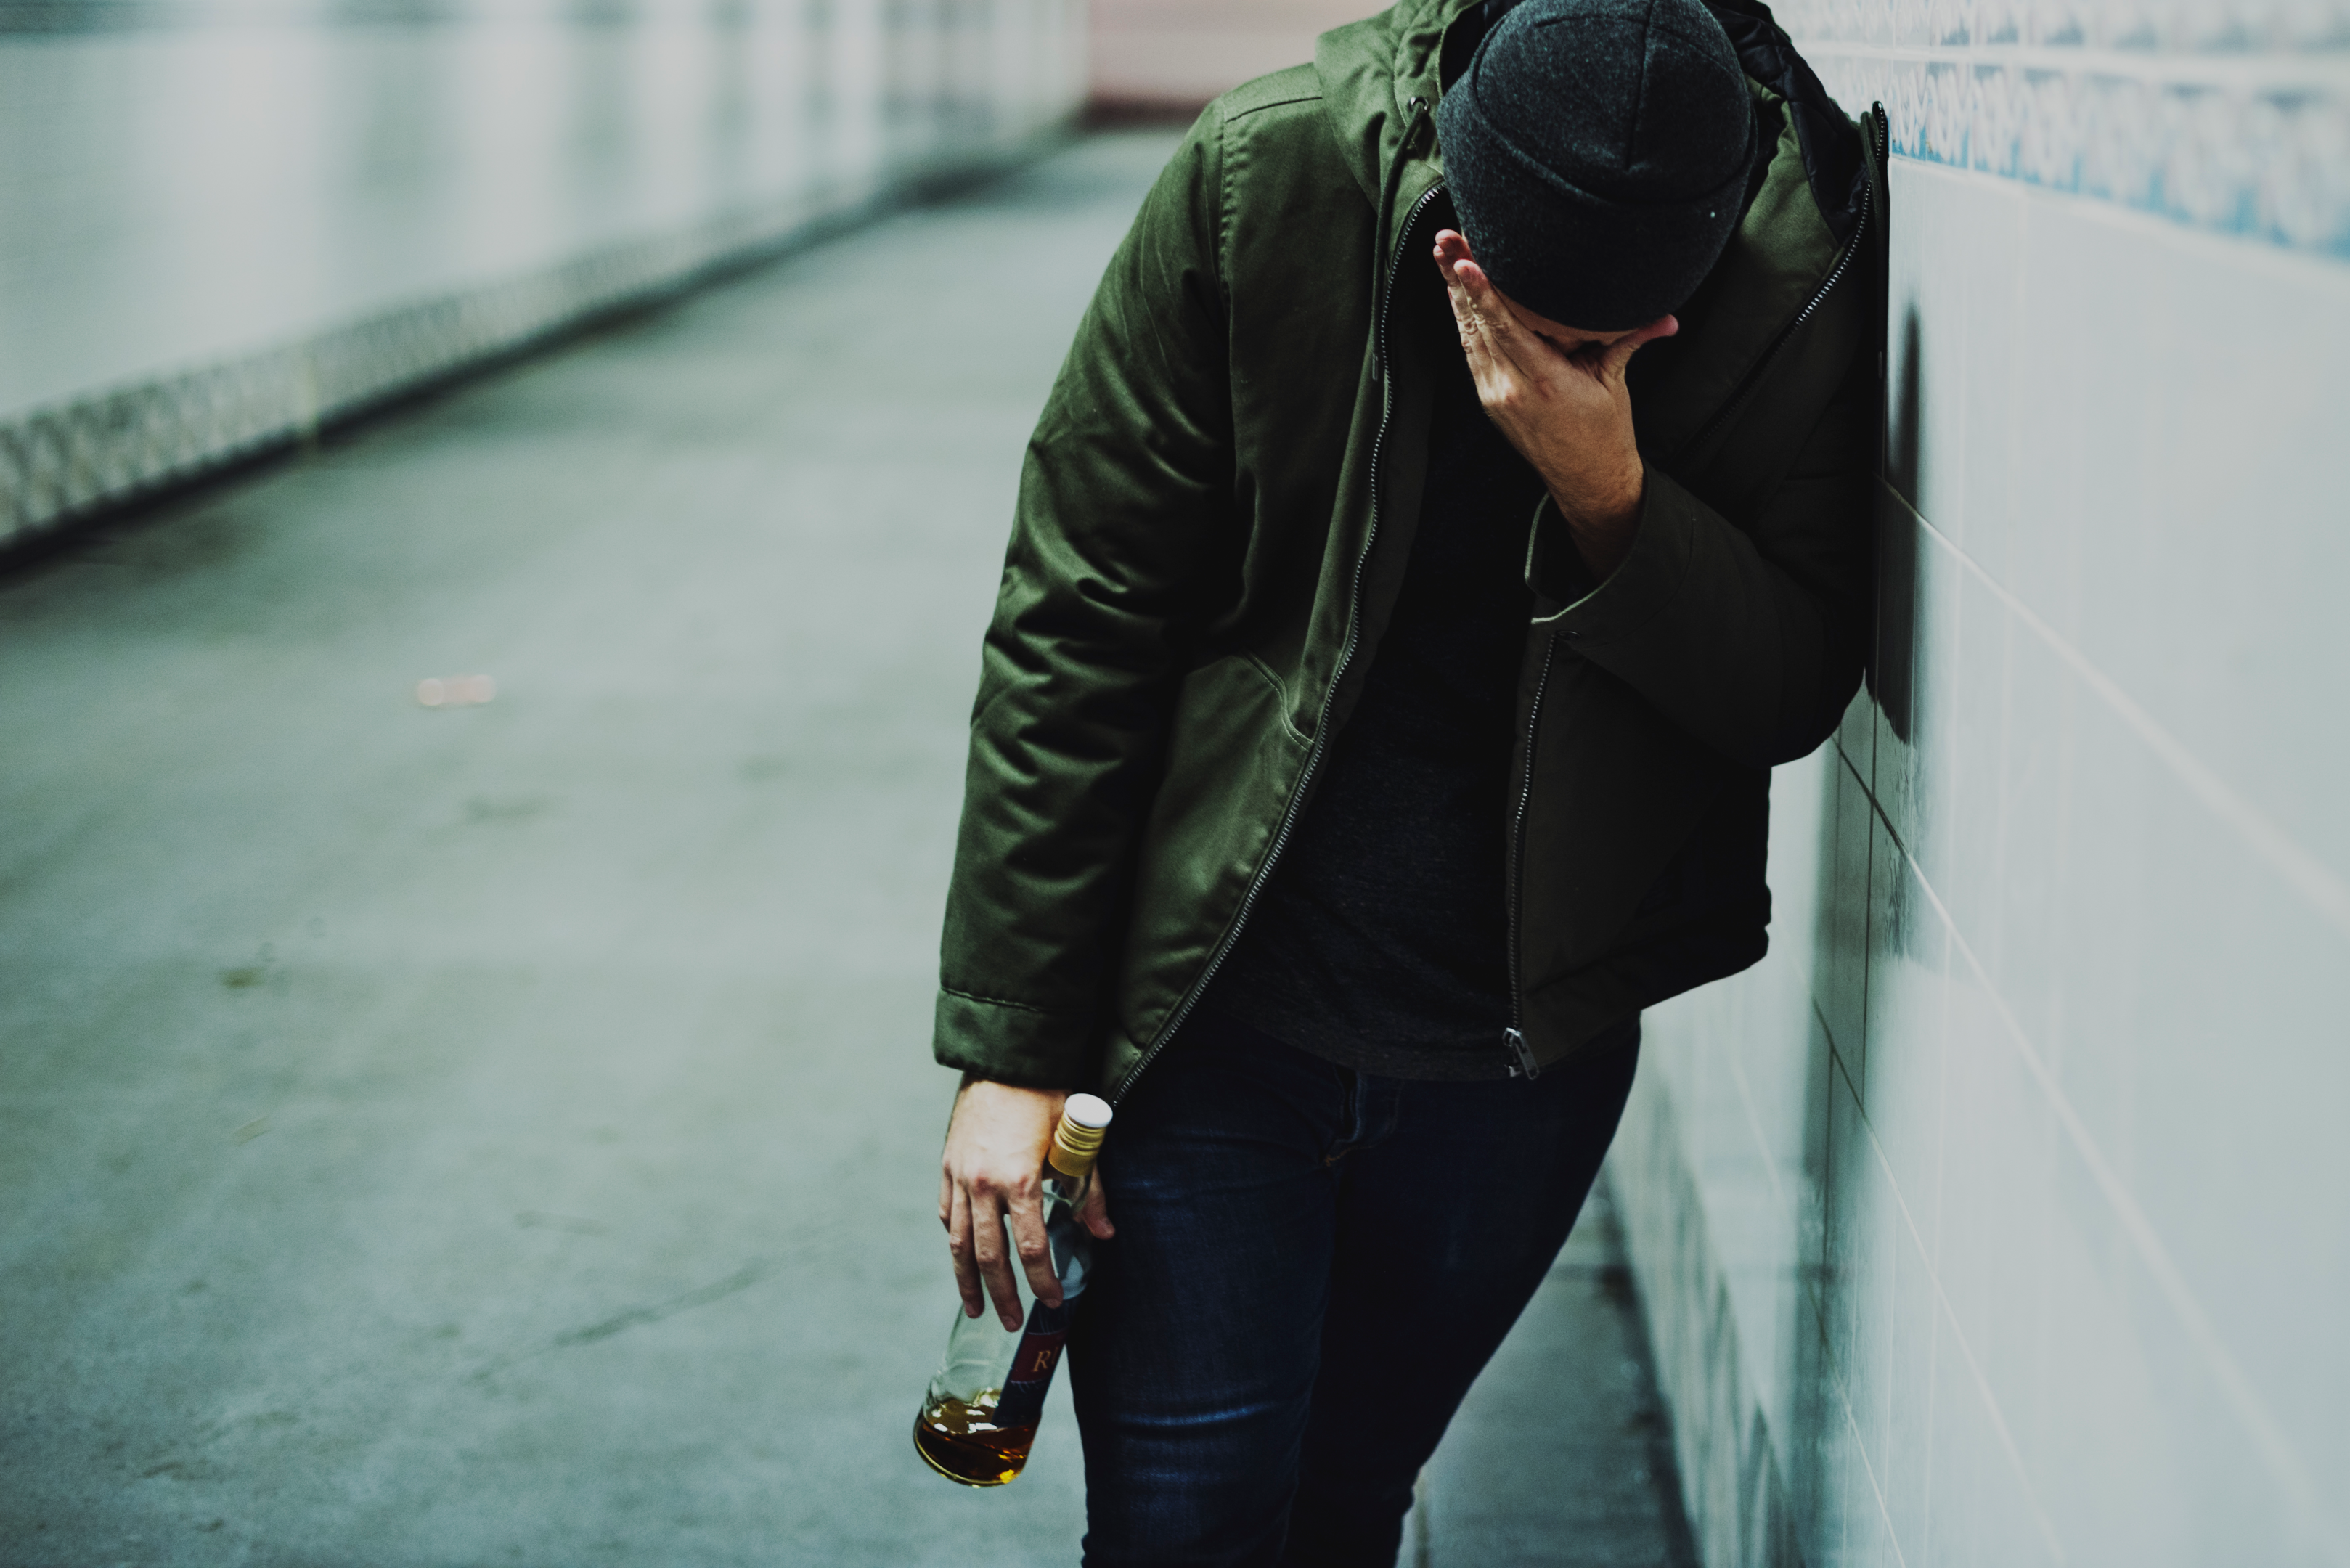 Man grappling with homelessness and addiction, clutching a liquor bottle.